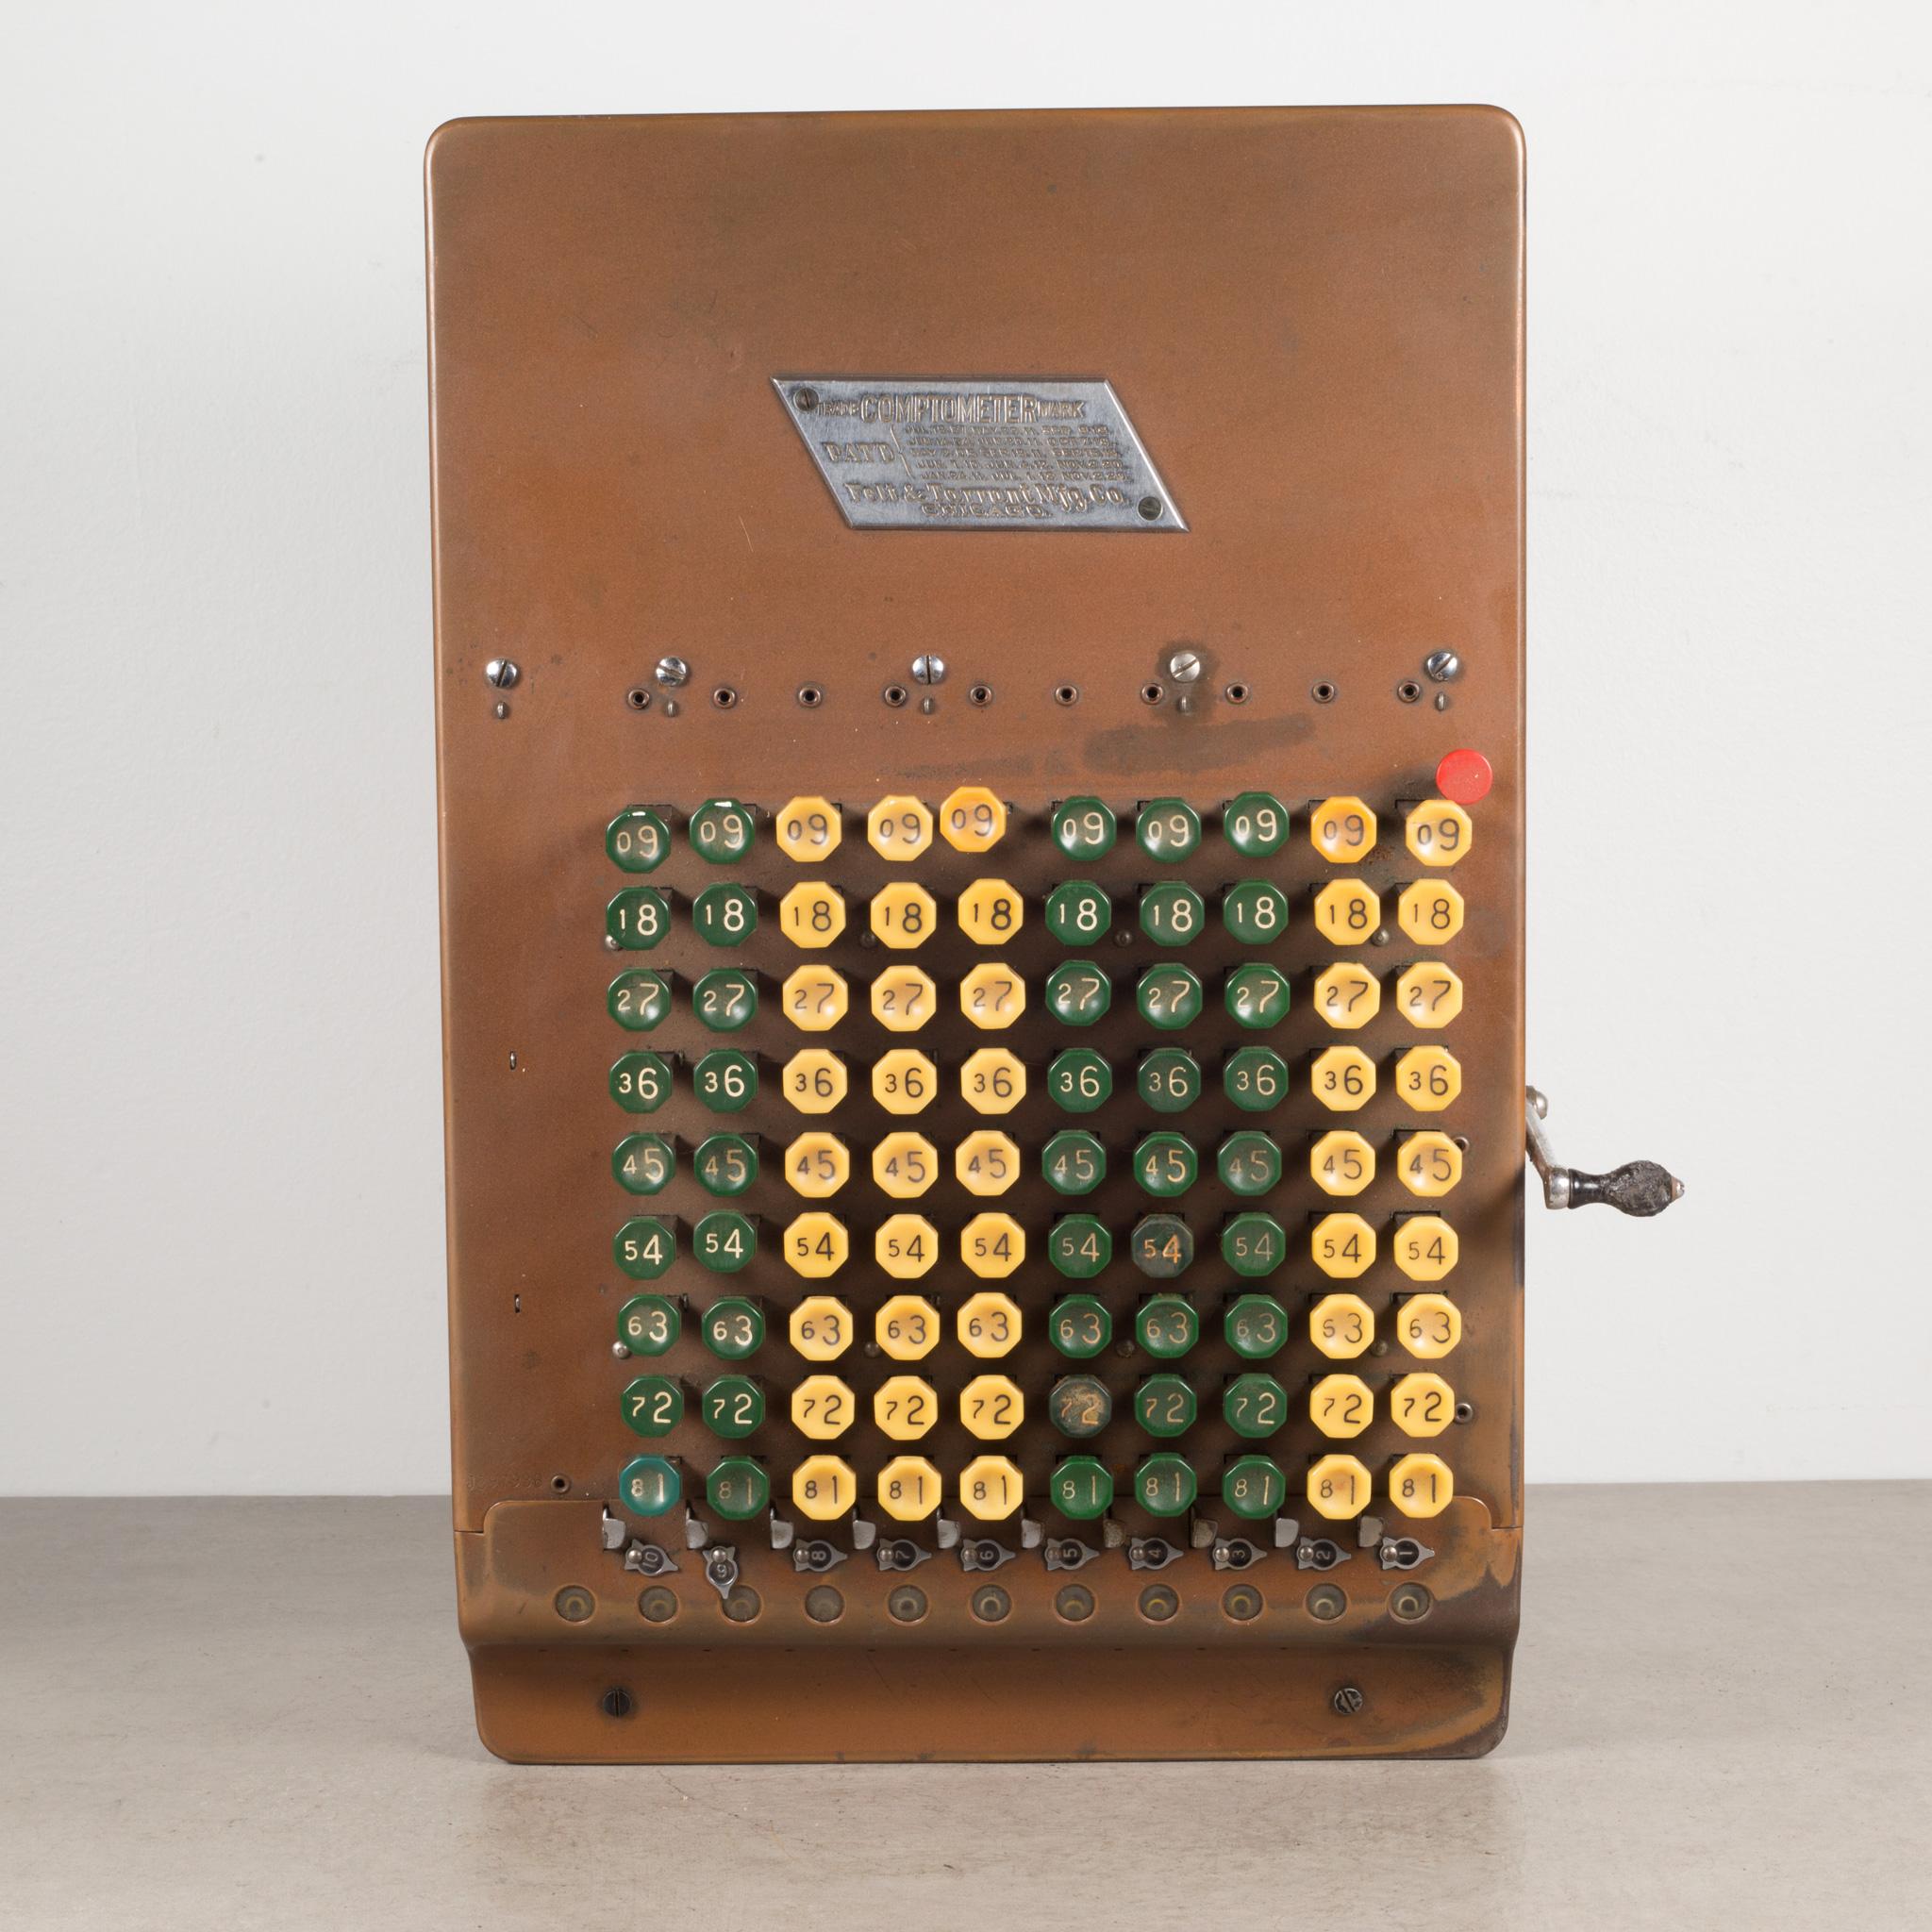 About
An antique Comptometer copper and tin adding machine with yellow and green Bakelite buttons. The lever pulls forward and back working the inner mechanisms. The piece has retained its original finish and is in good condition with appropriate